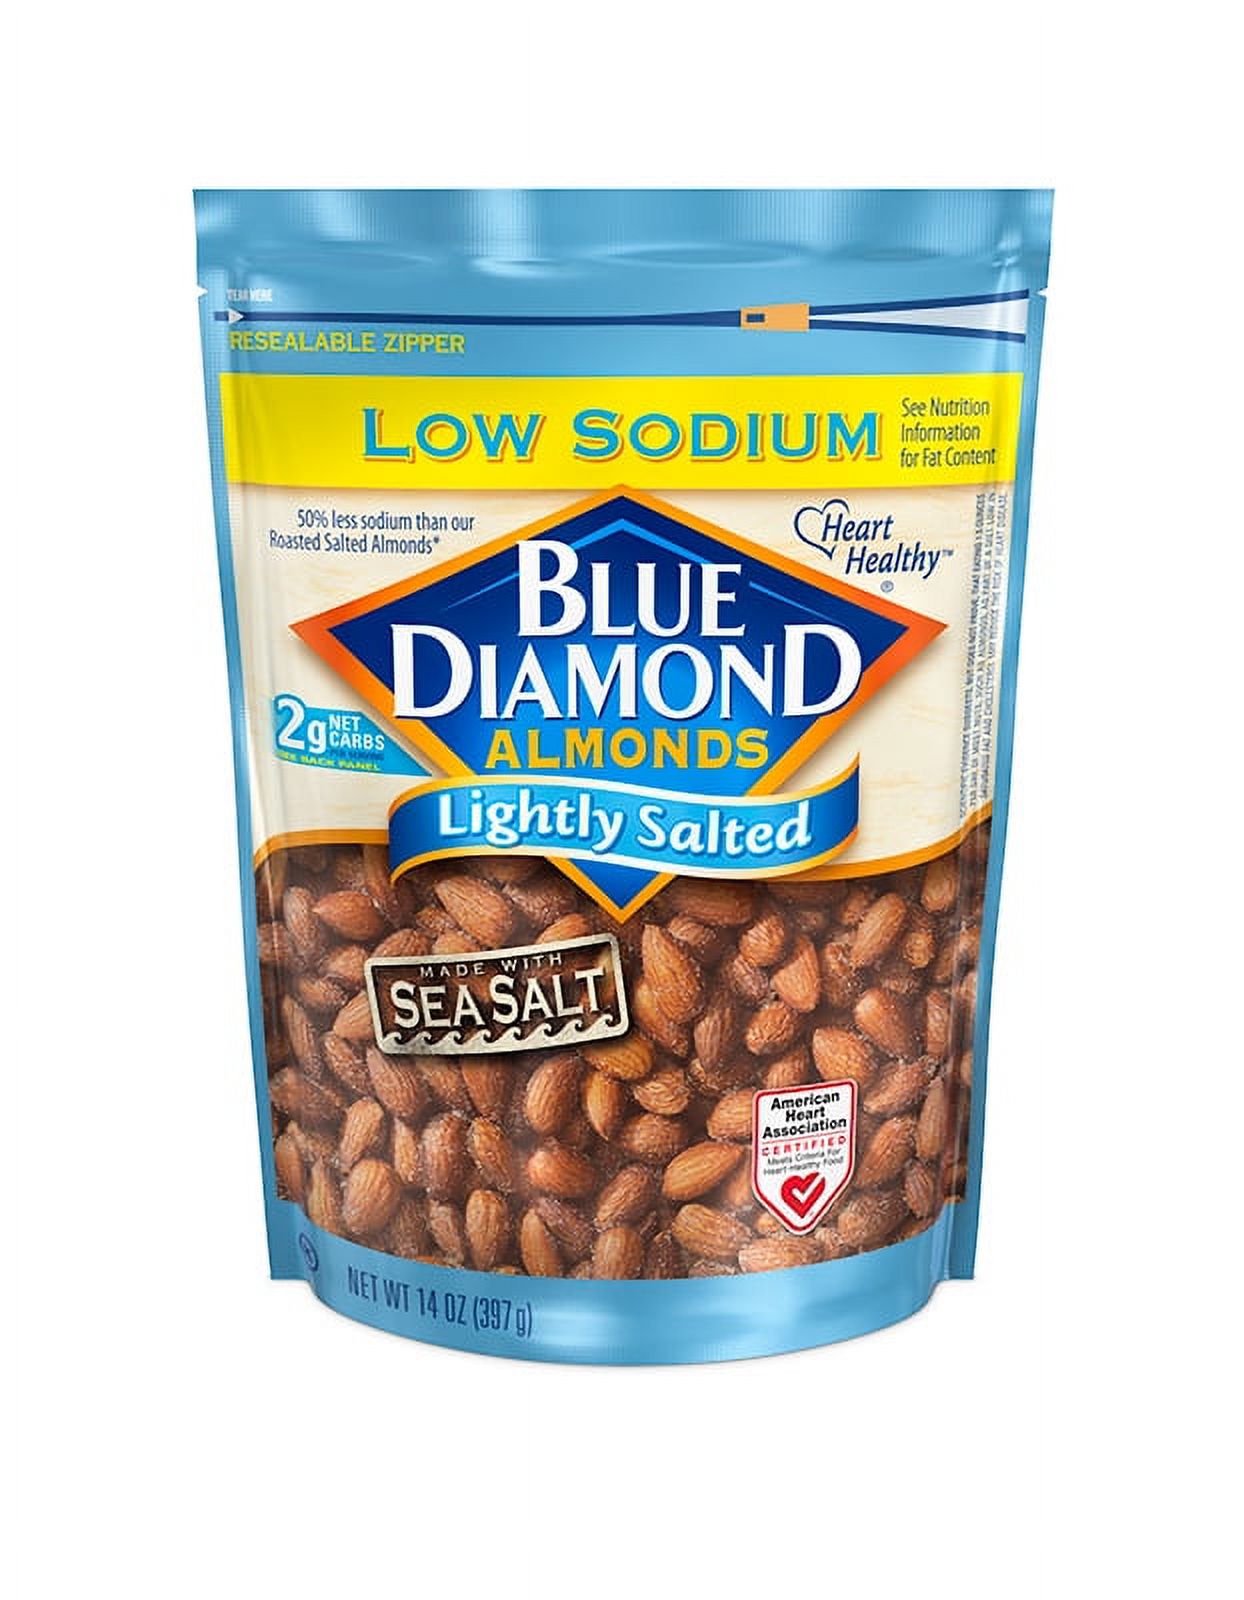 Blue Diamond Almonds, Lightly Salted Flavored Snack Nuts Perfect for Healthy Snacking, 14 oz - image 3 of 7